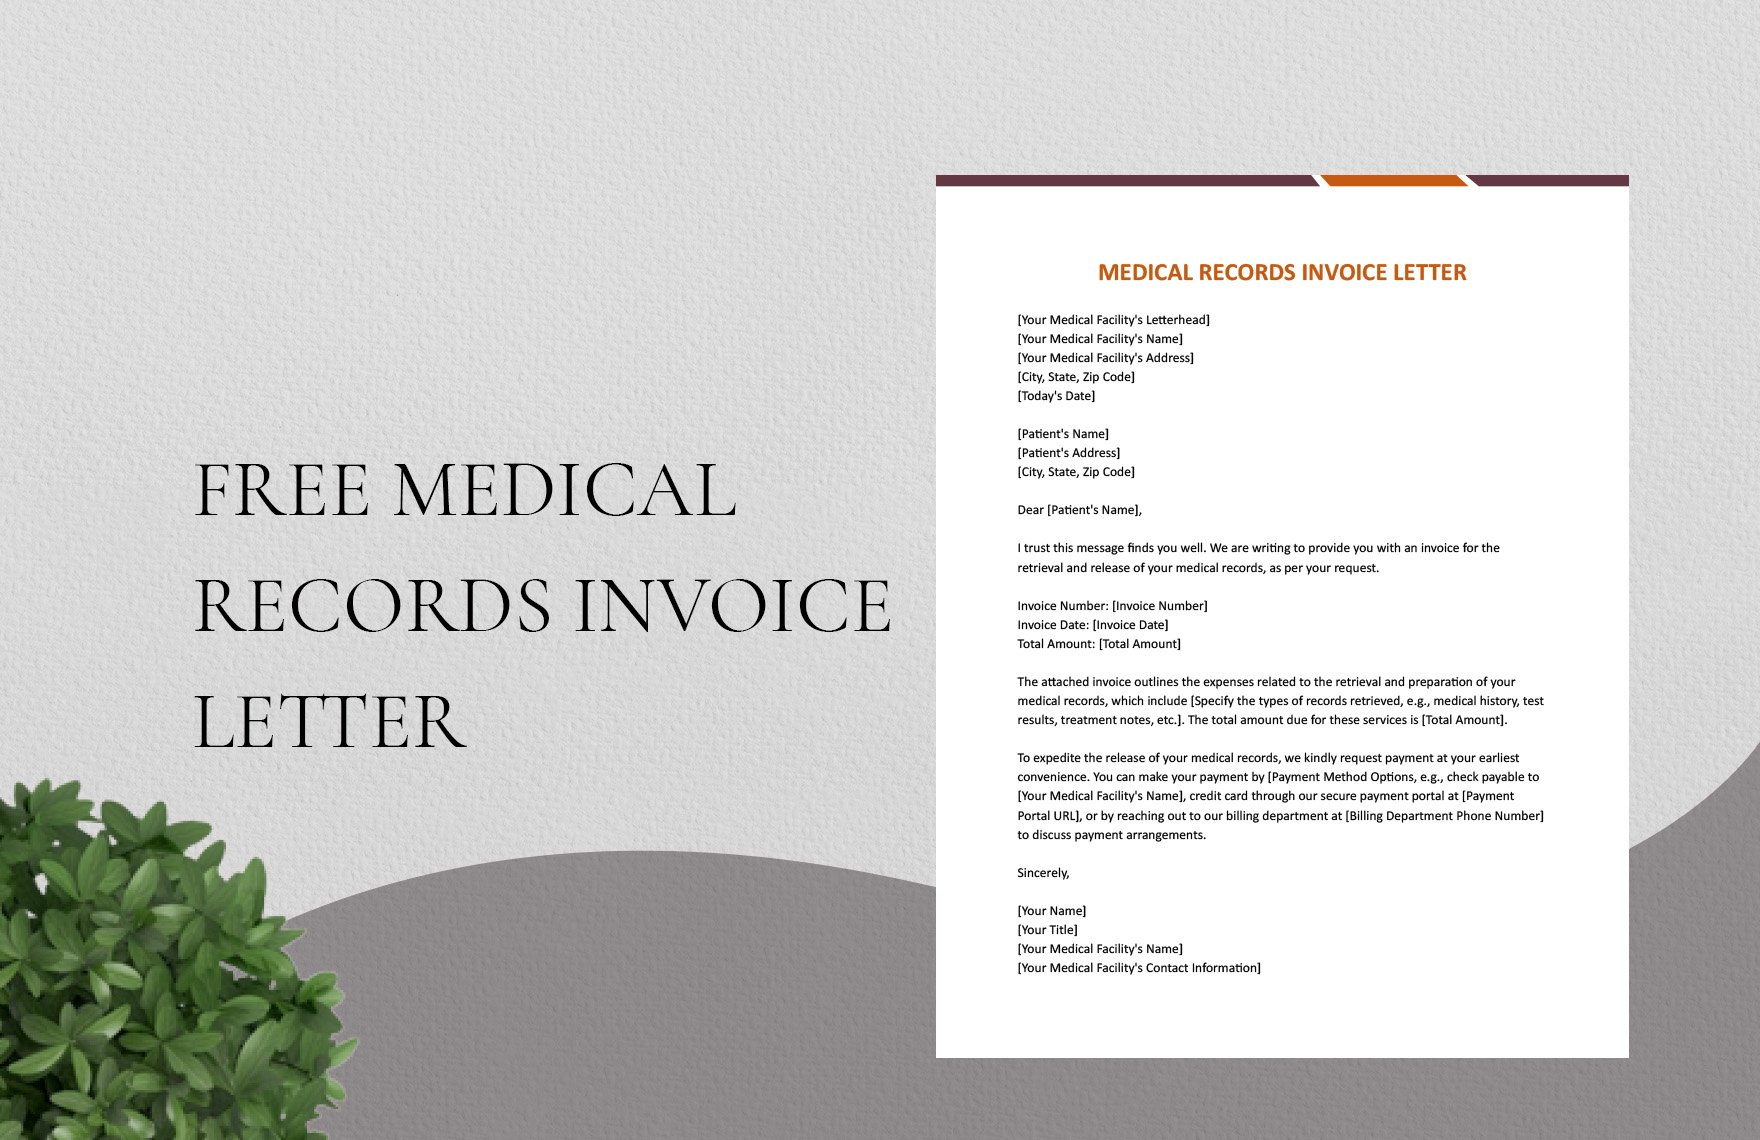 Medical Records Invoice Letter in Word, Google Docs - Download ...